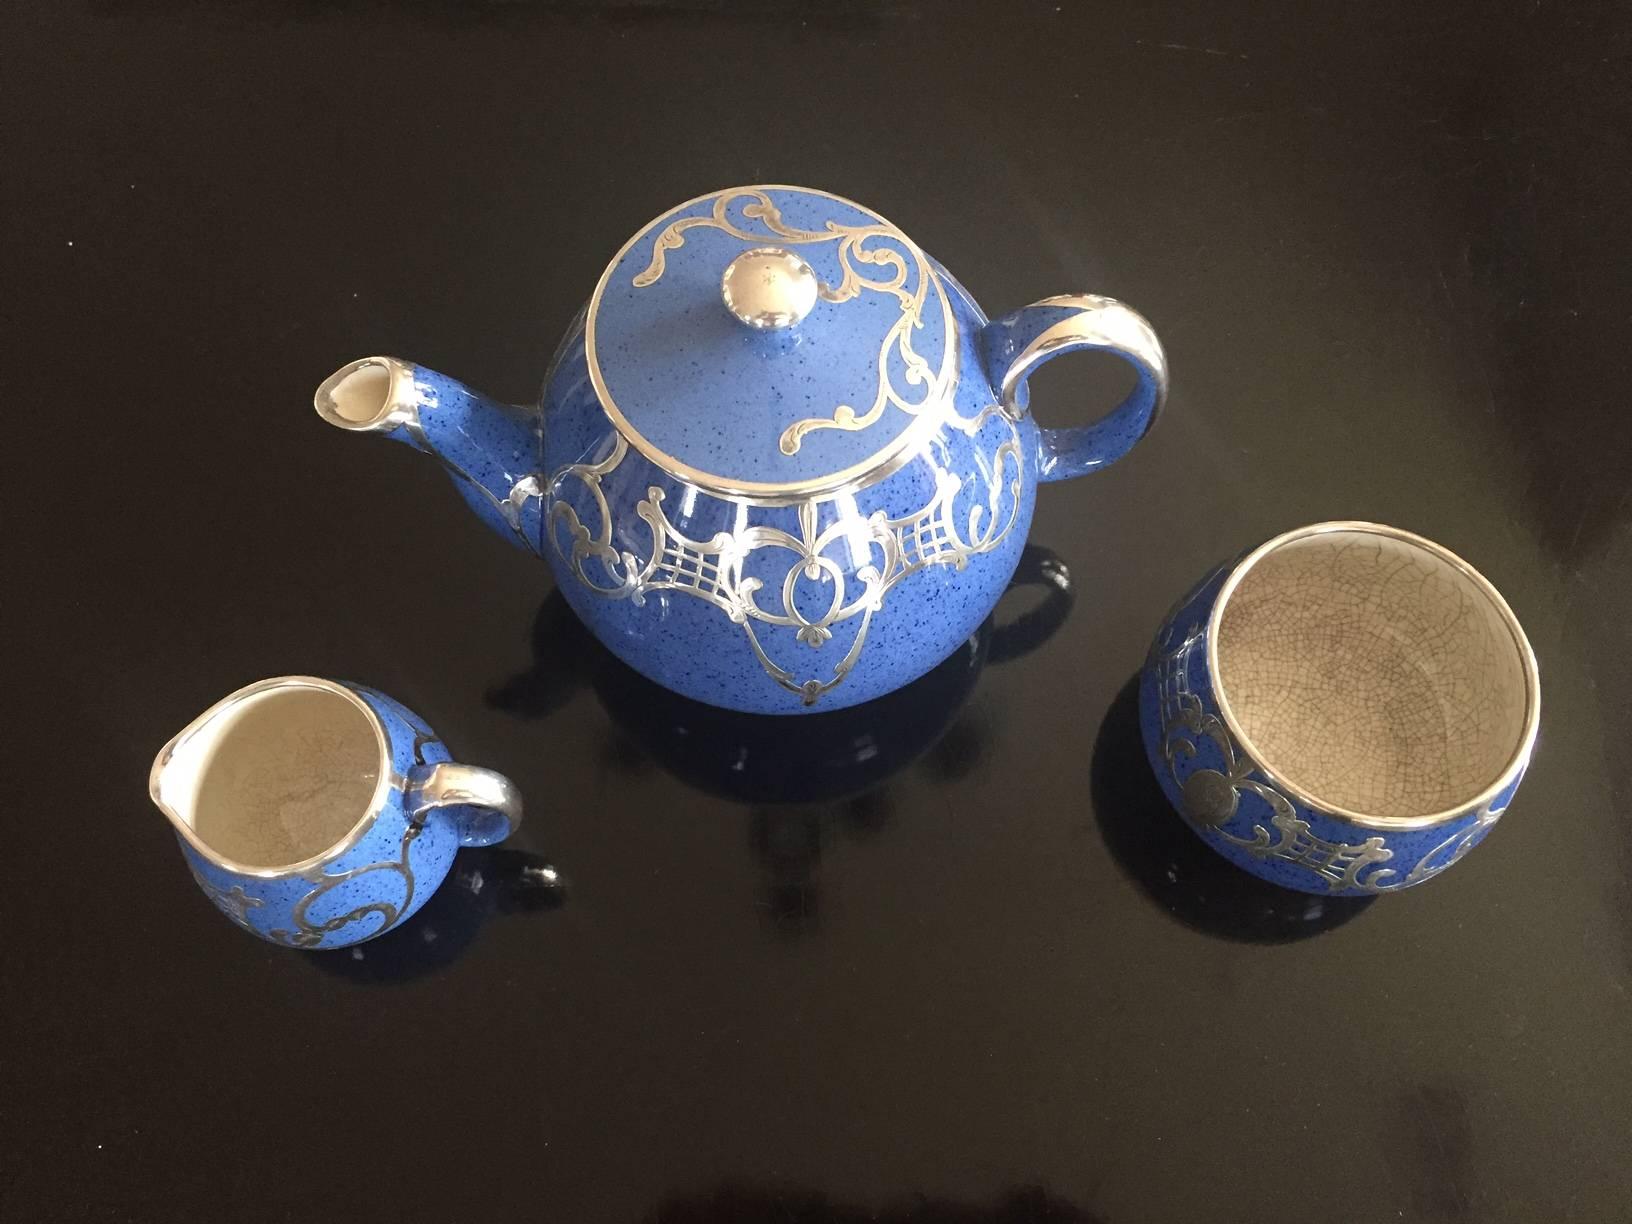 Moorcroft English Pottery Tea Service in Lapis Blue with Silver Overlay In Good Condition For Sale In Nashville, TN